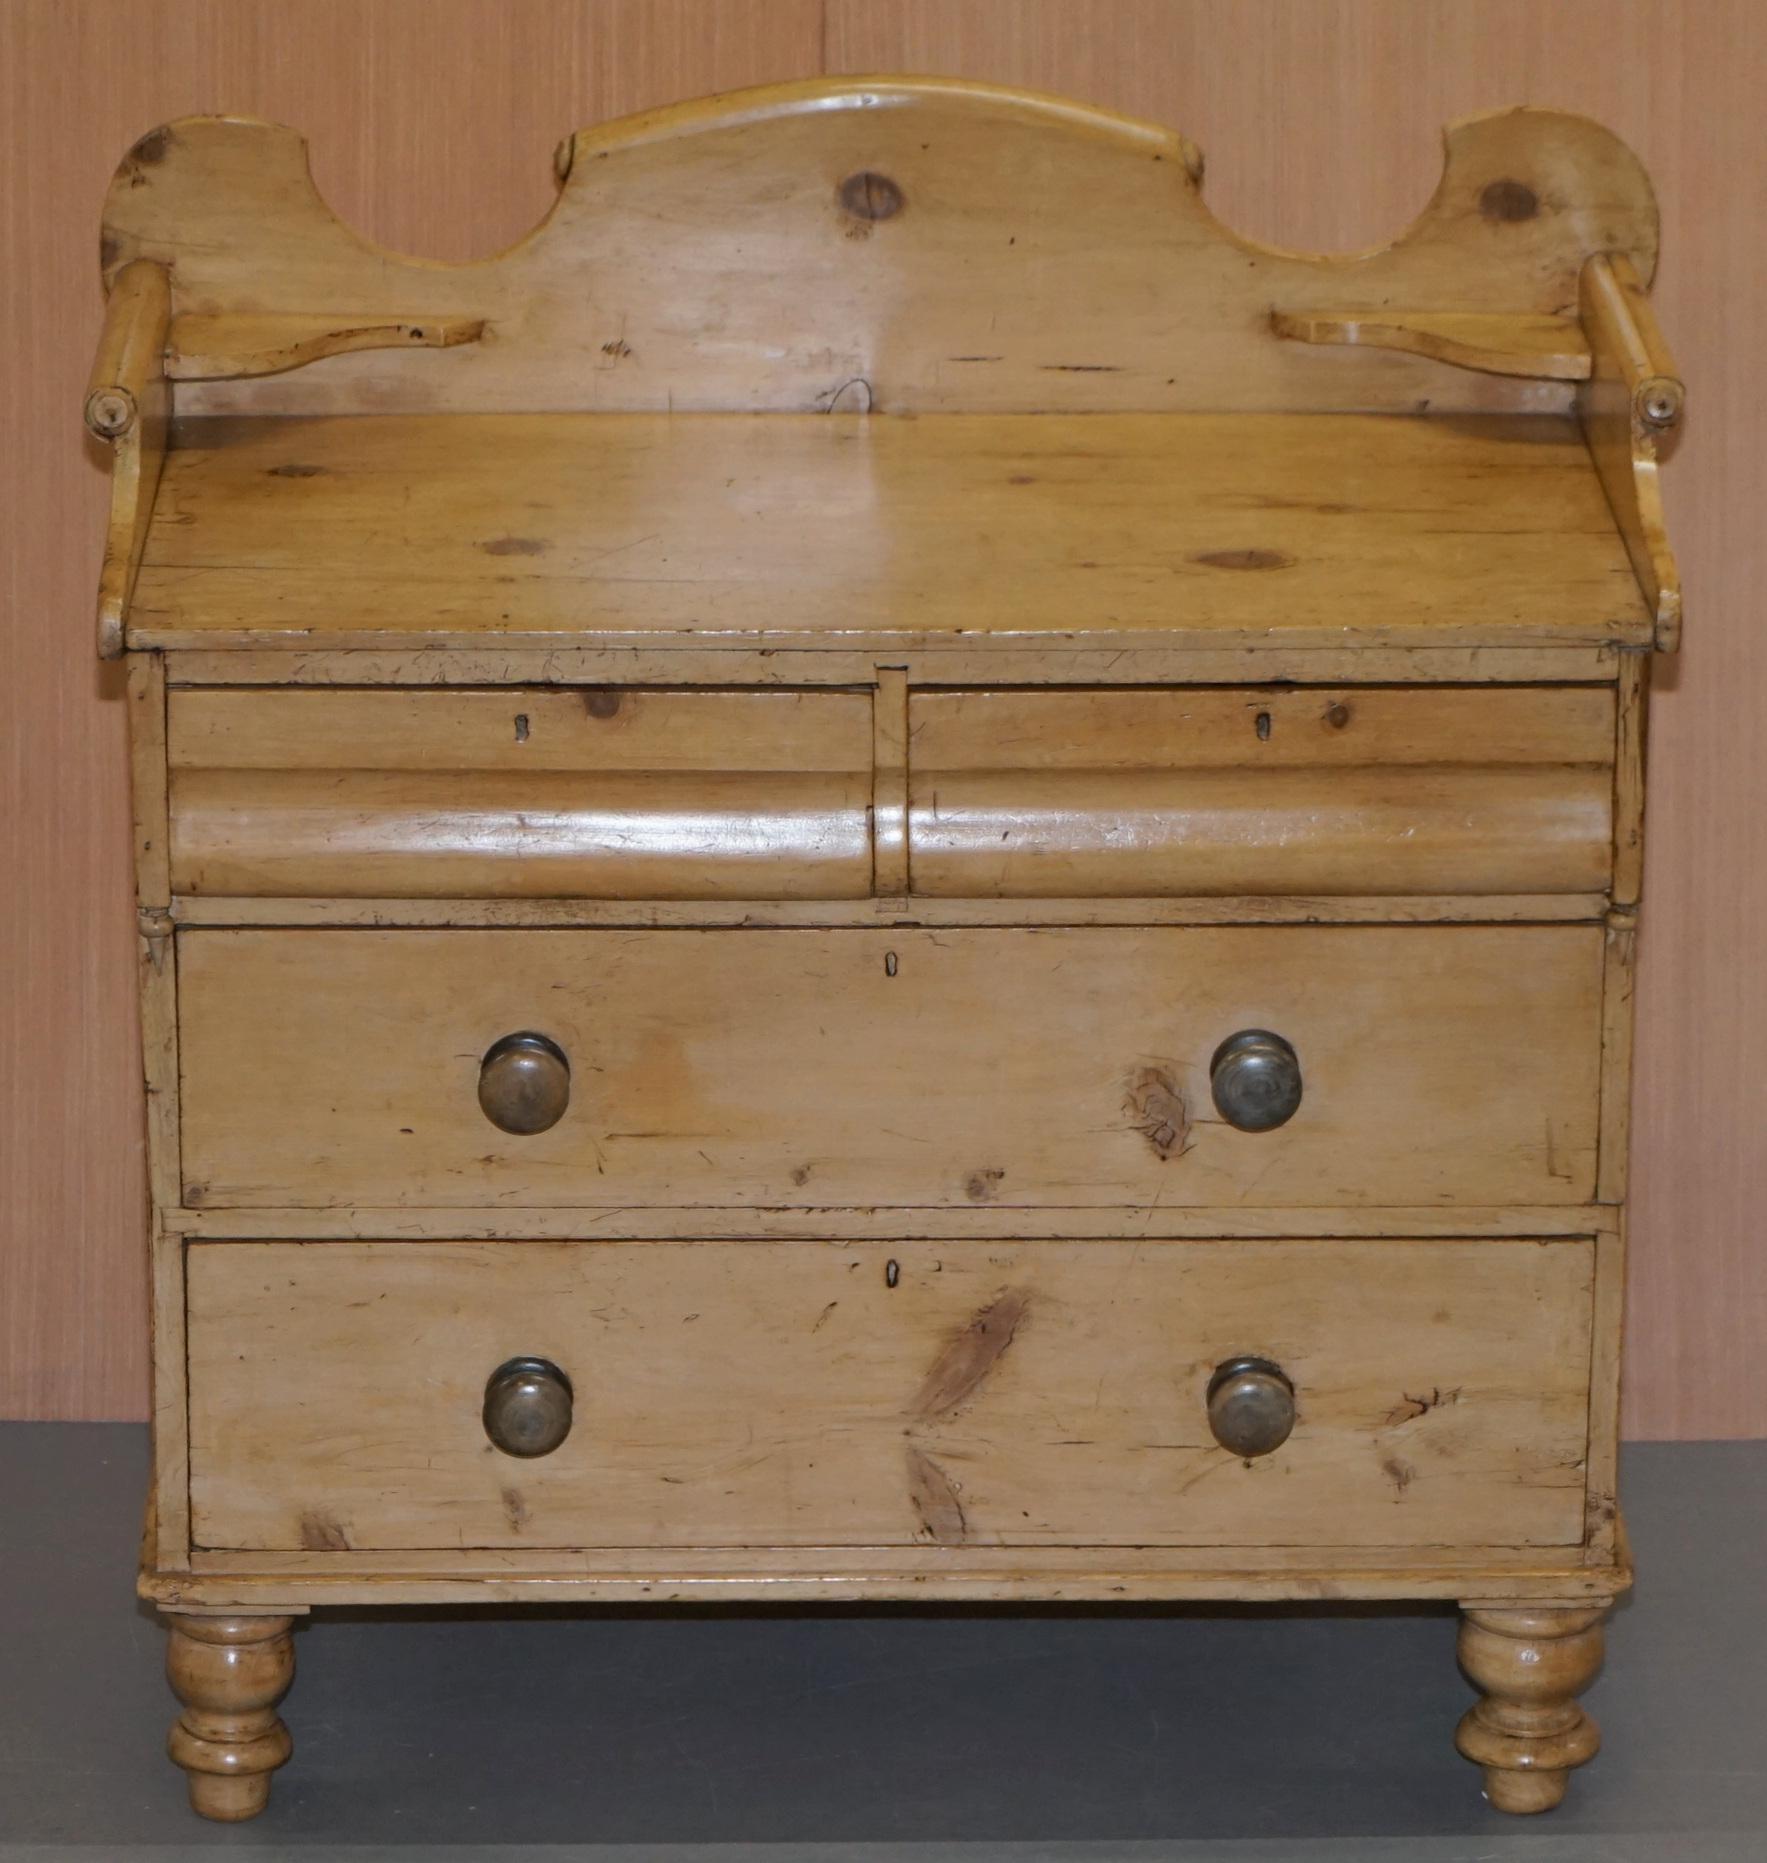 We are delighted to offer for sale this stunning Victorian pine chest of drawers wash stand with gallery back

These drawers are part of a set of Victorian pine furniture i have for sale, all other pieces are listed under my other items

These